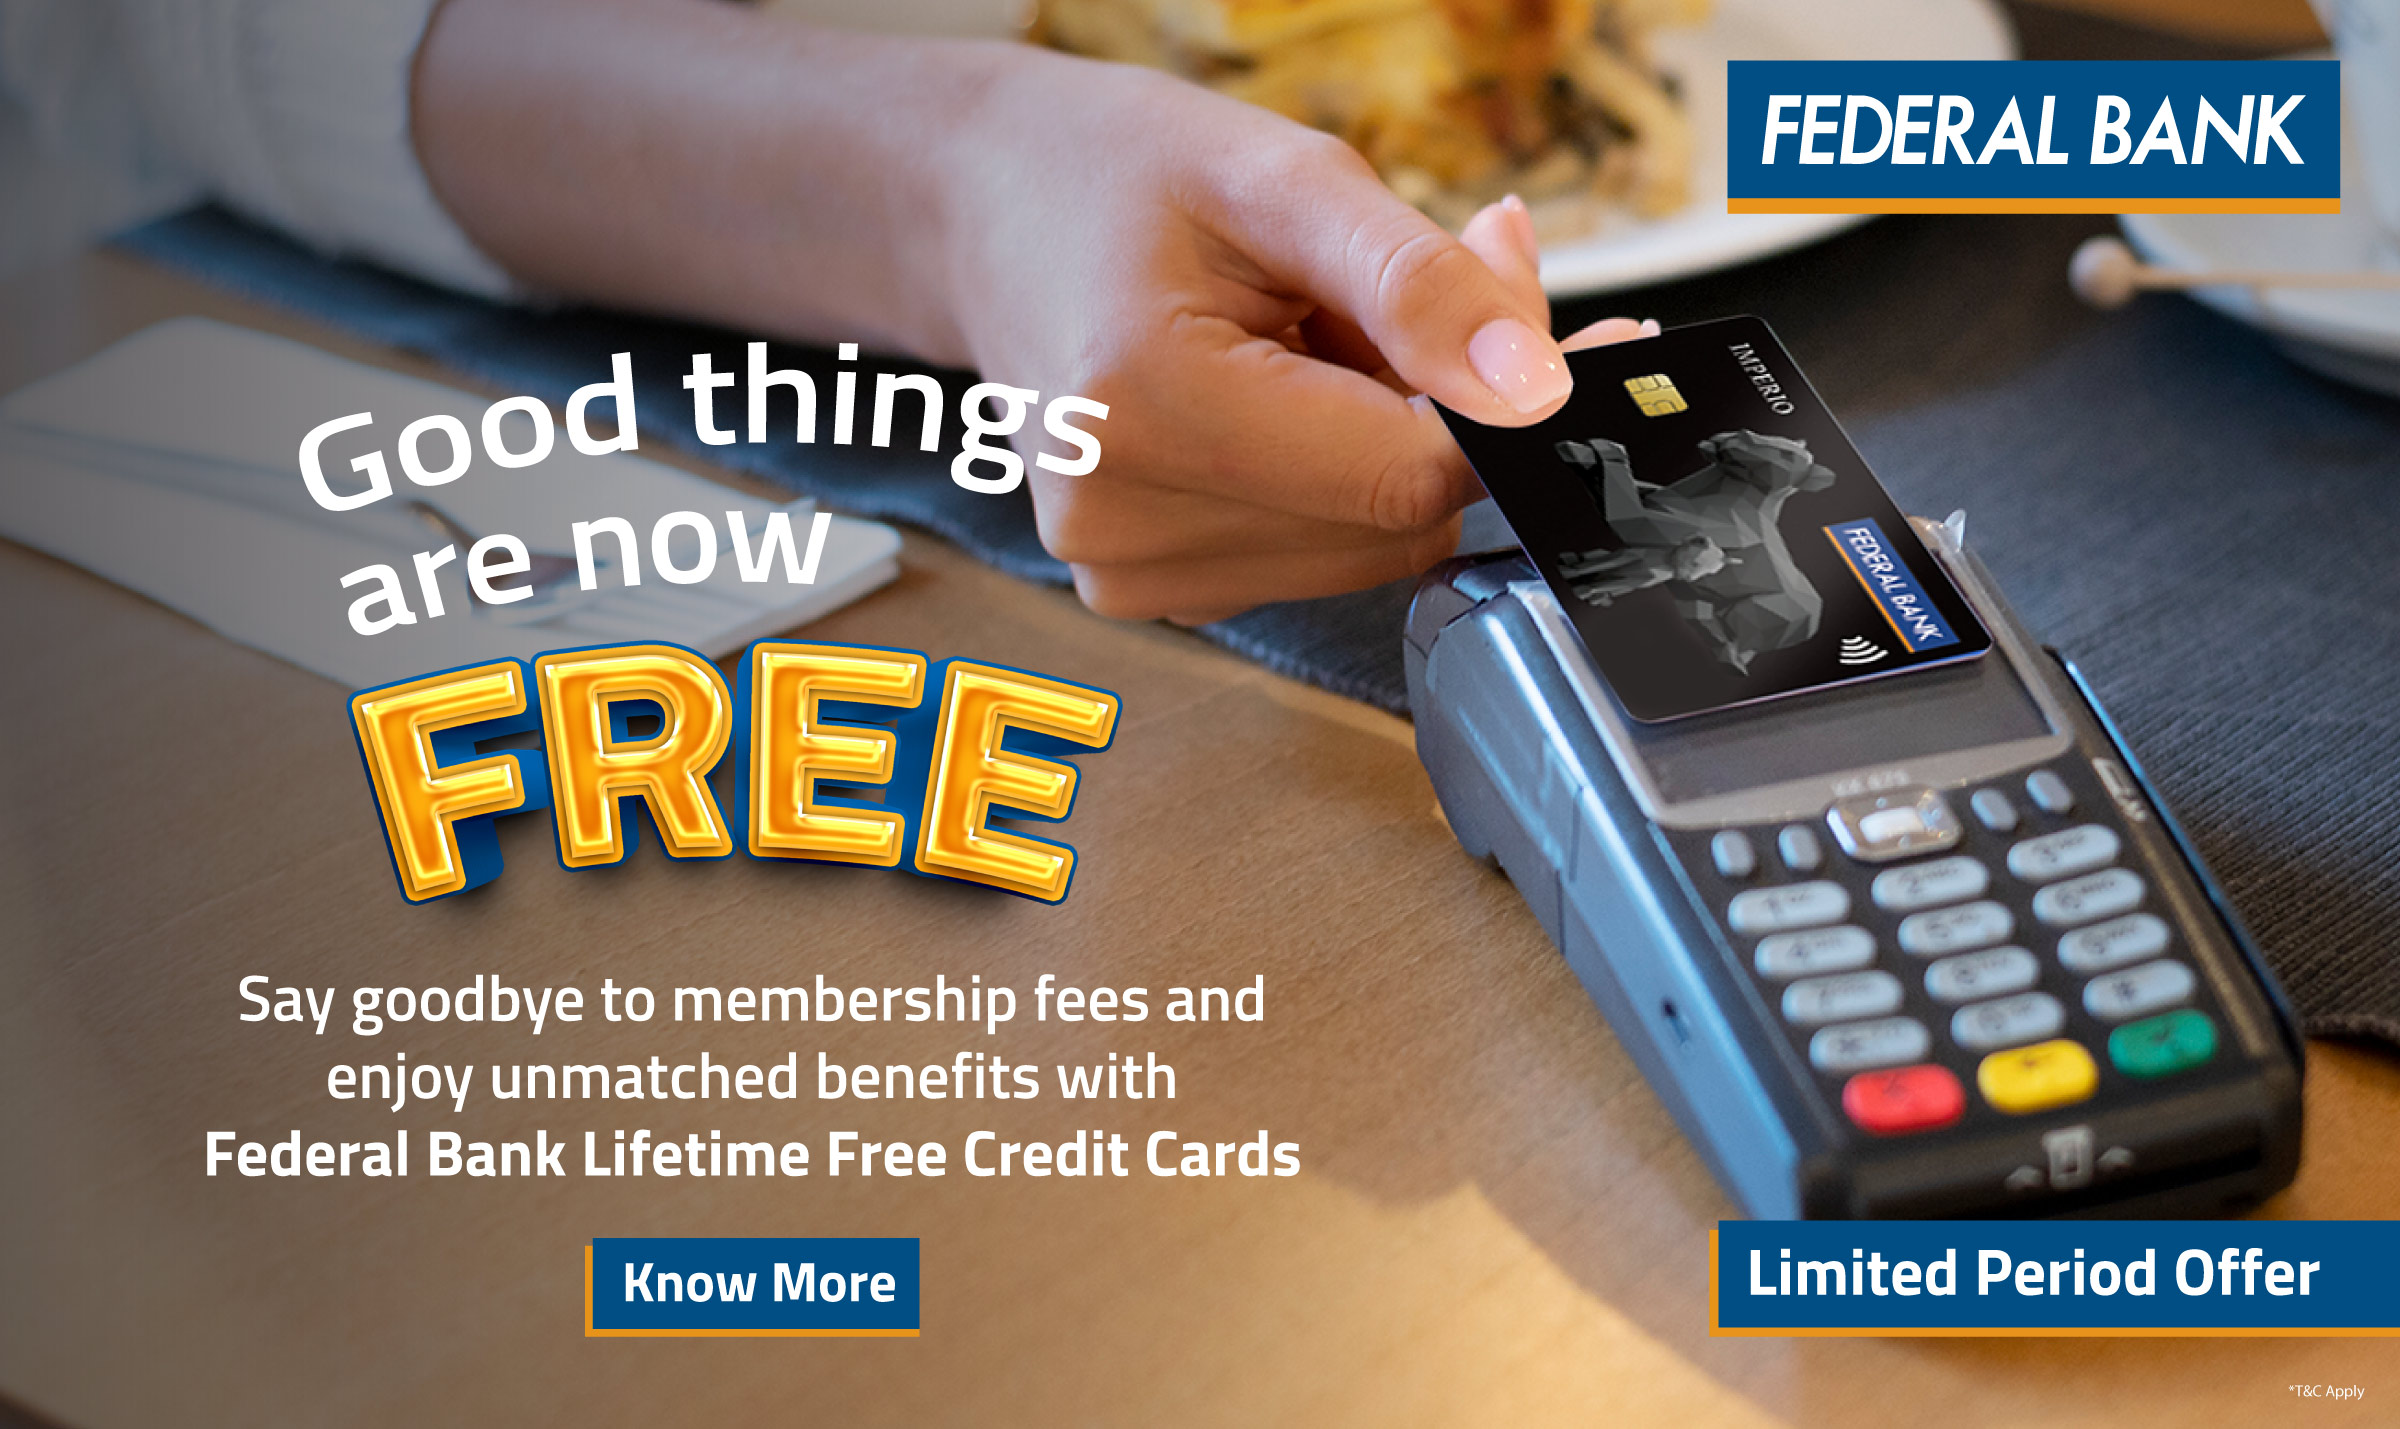 Apply for Life Time Free Credit Cards from Federal Bank